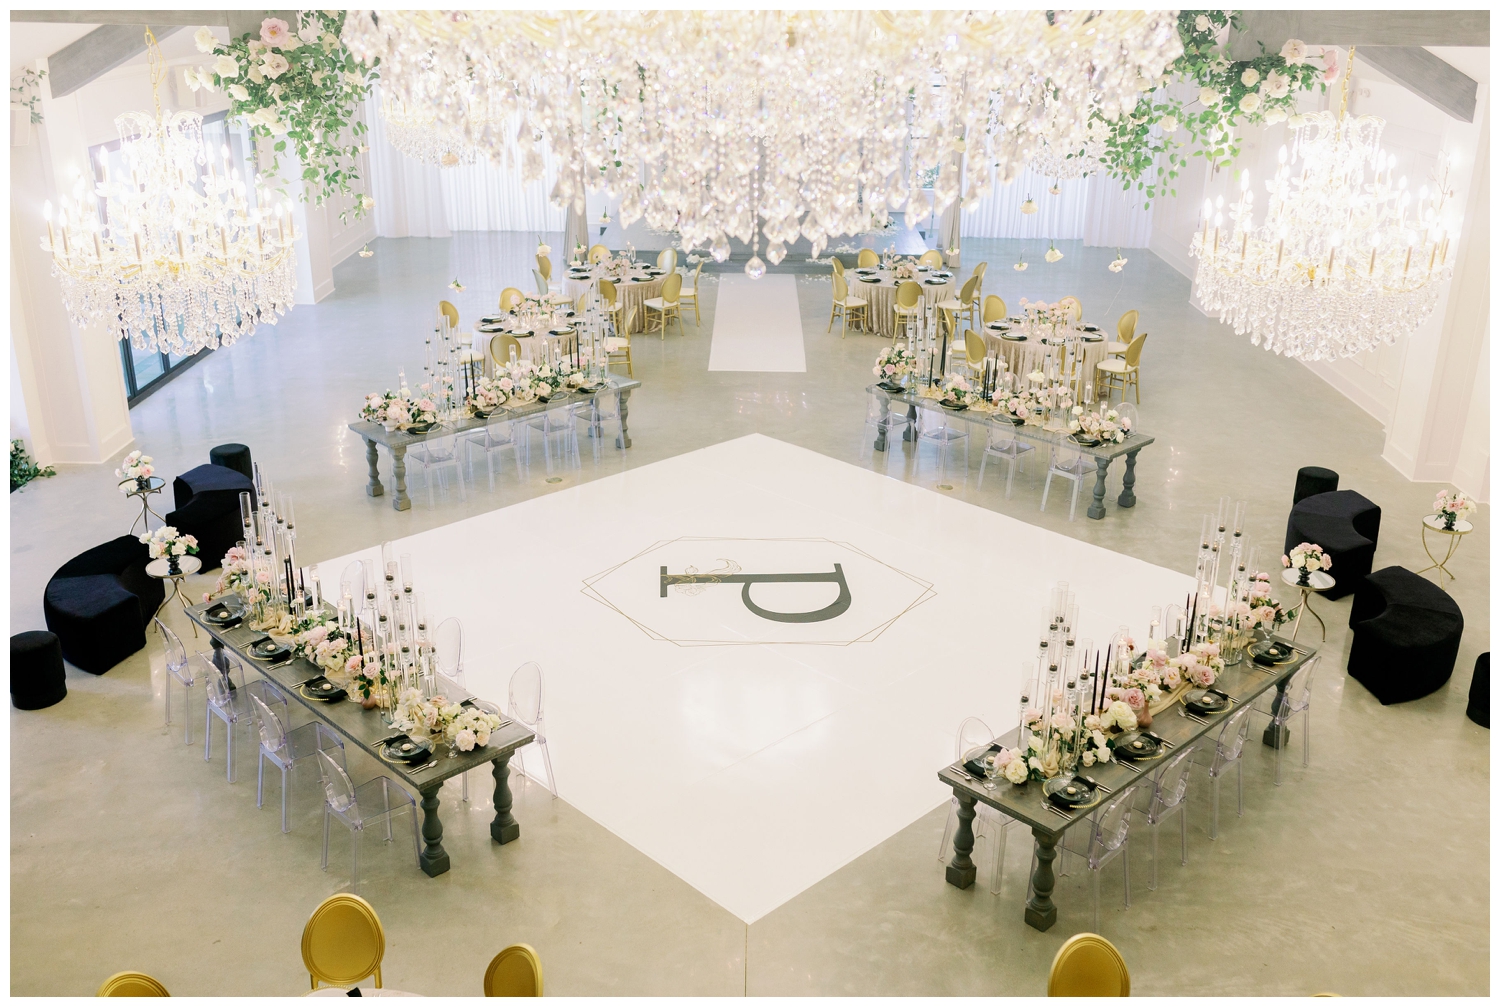 Beloved Ballroom wedding reception space at The Peach Orchard Venue